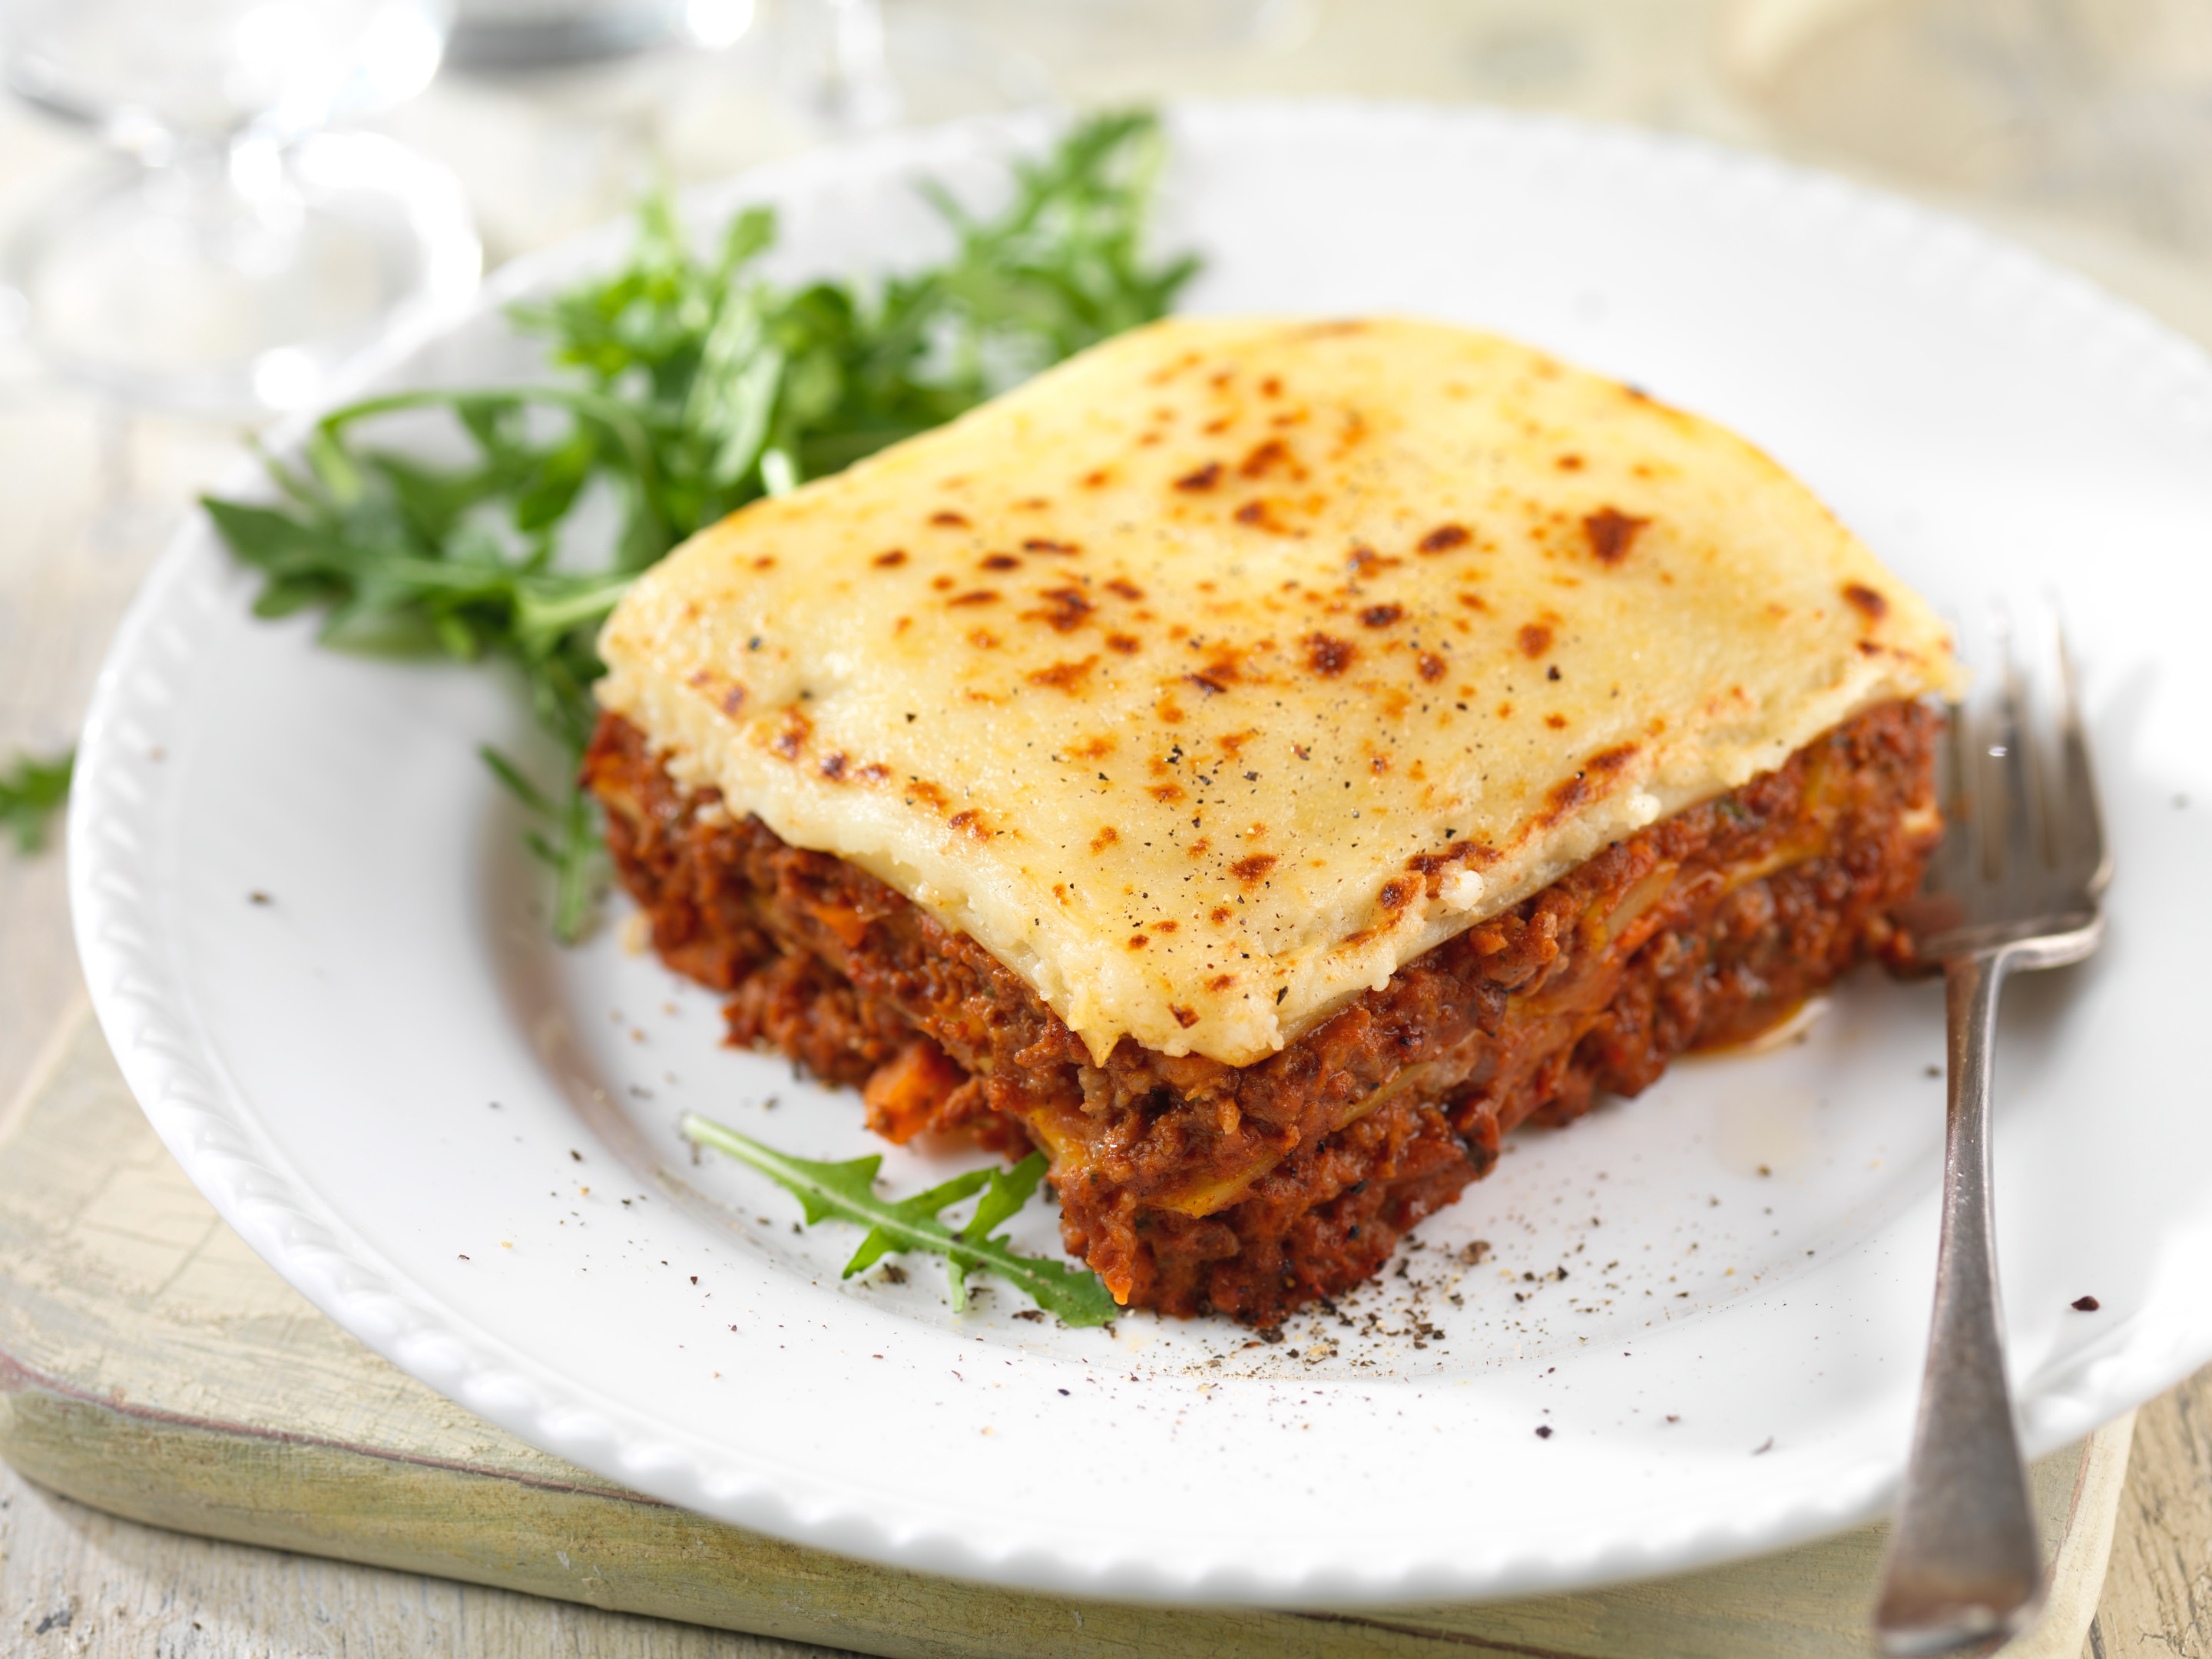 A lasagne served in a white plate and a silver fork placed beside. It is served with a few salad leaves.